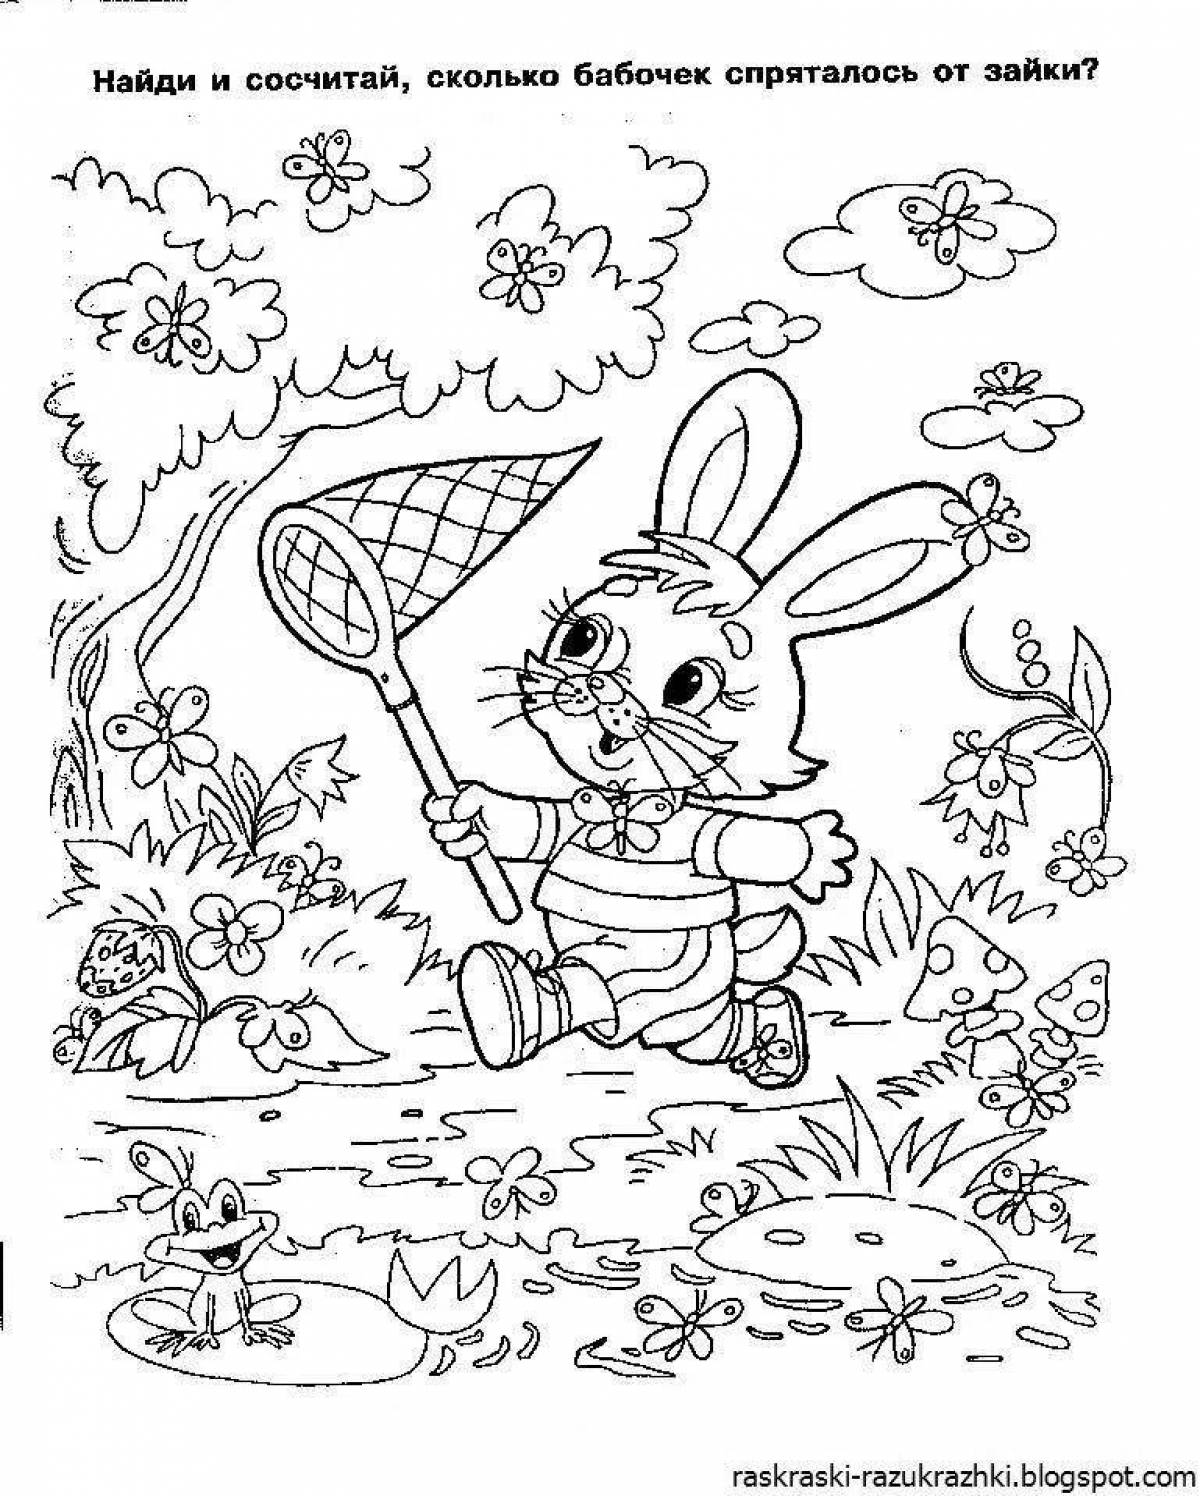 Coloring book for smart kids 5-6 years old